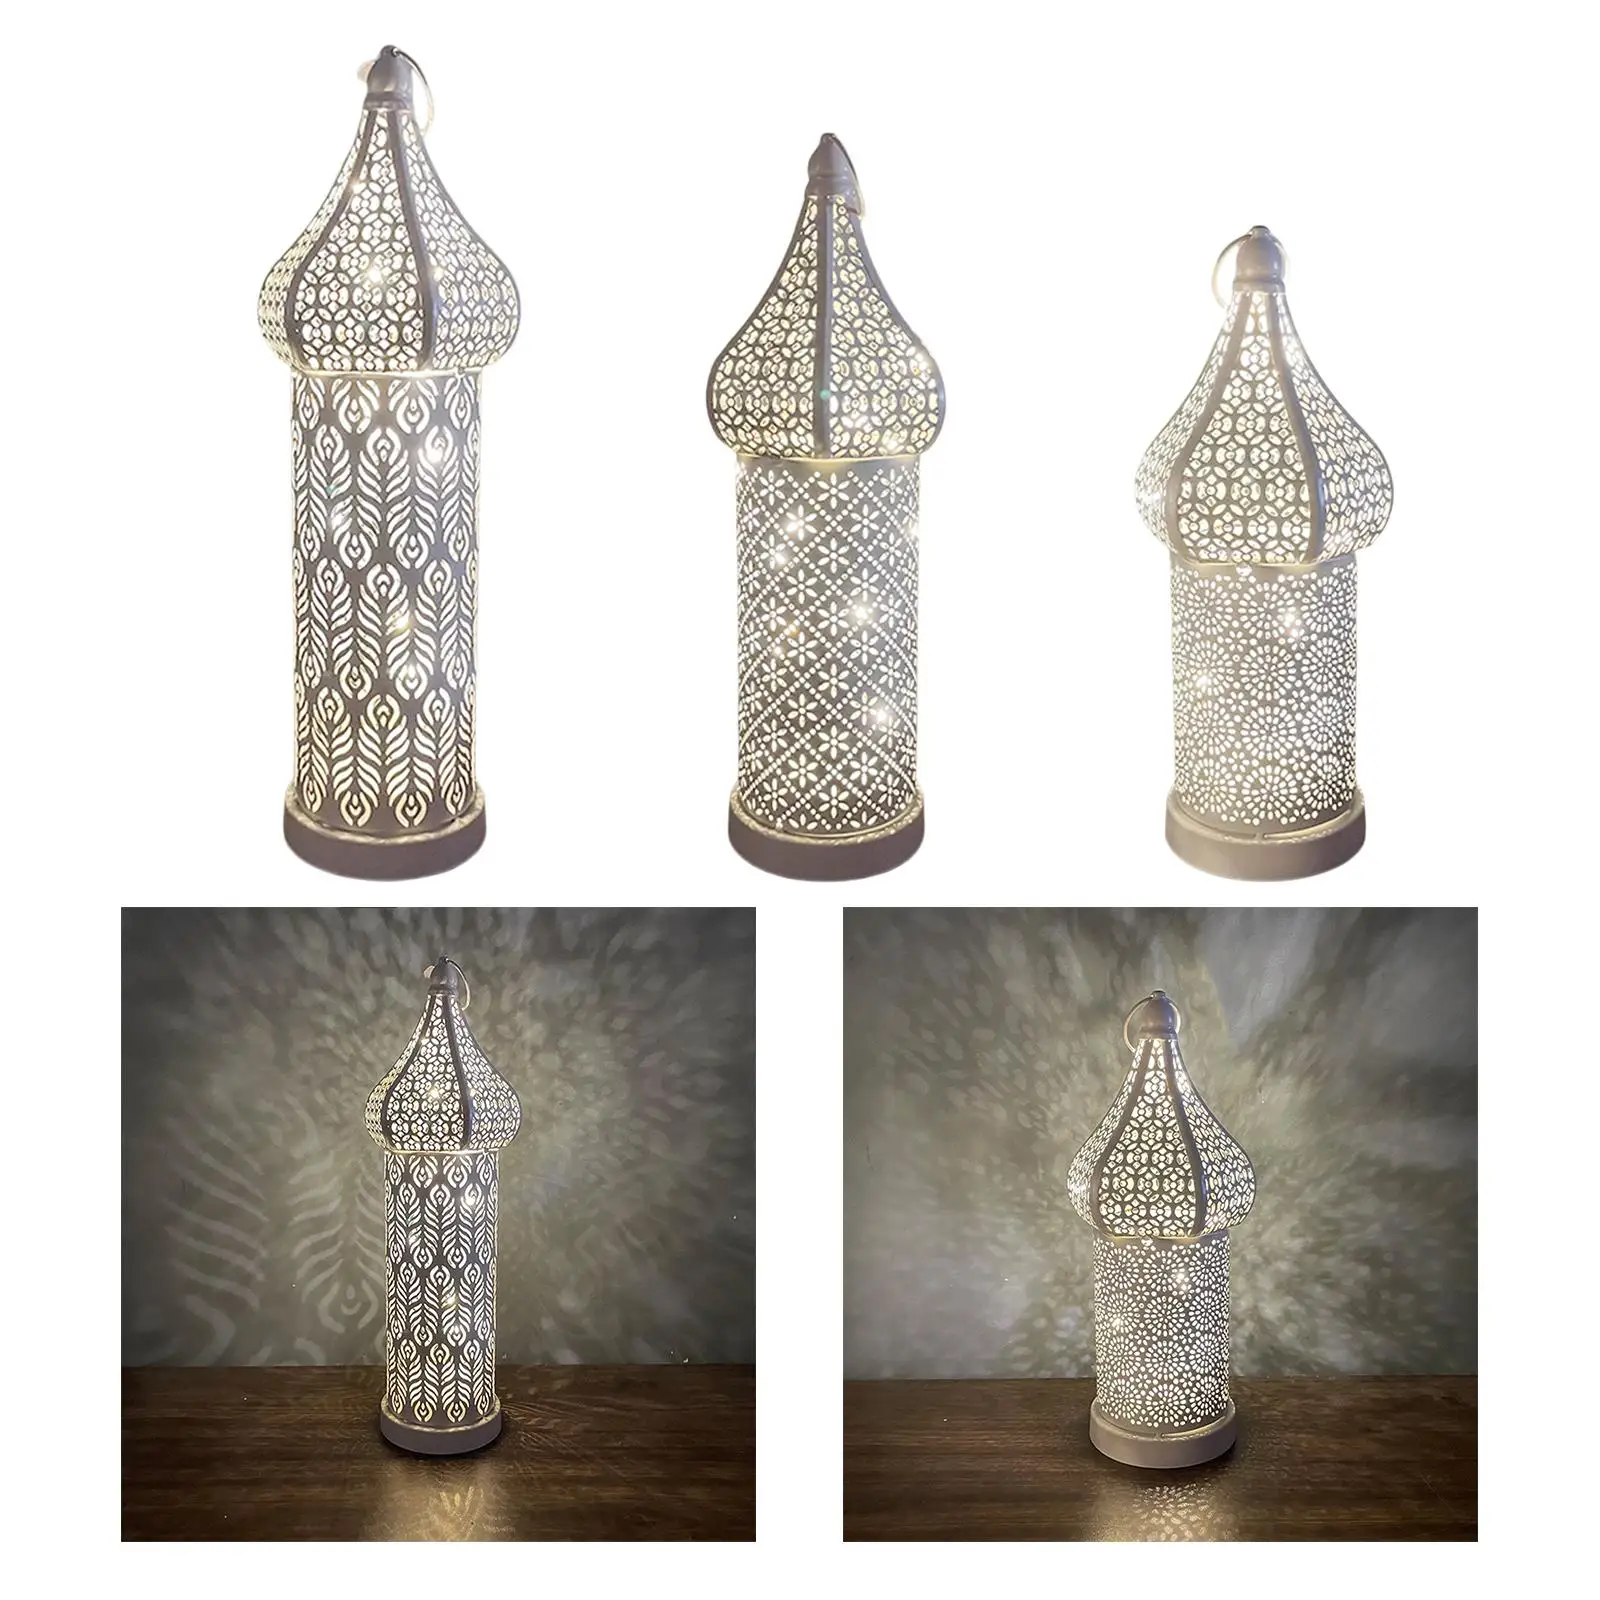 Retro Style Moroccan Lantern Light Props Desk Lamp for Wedding Party Living Room